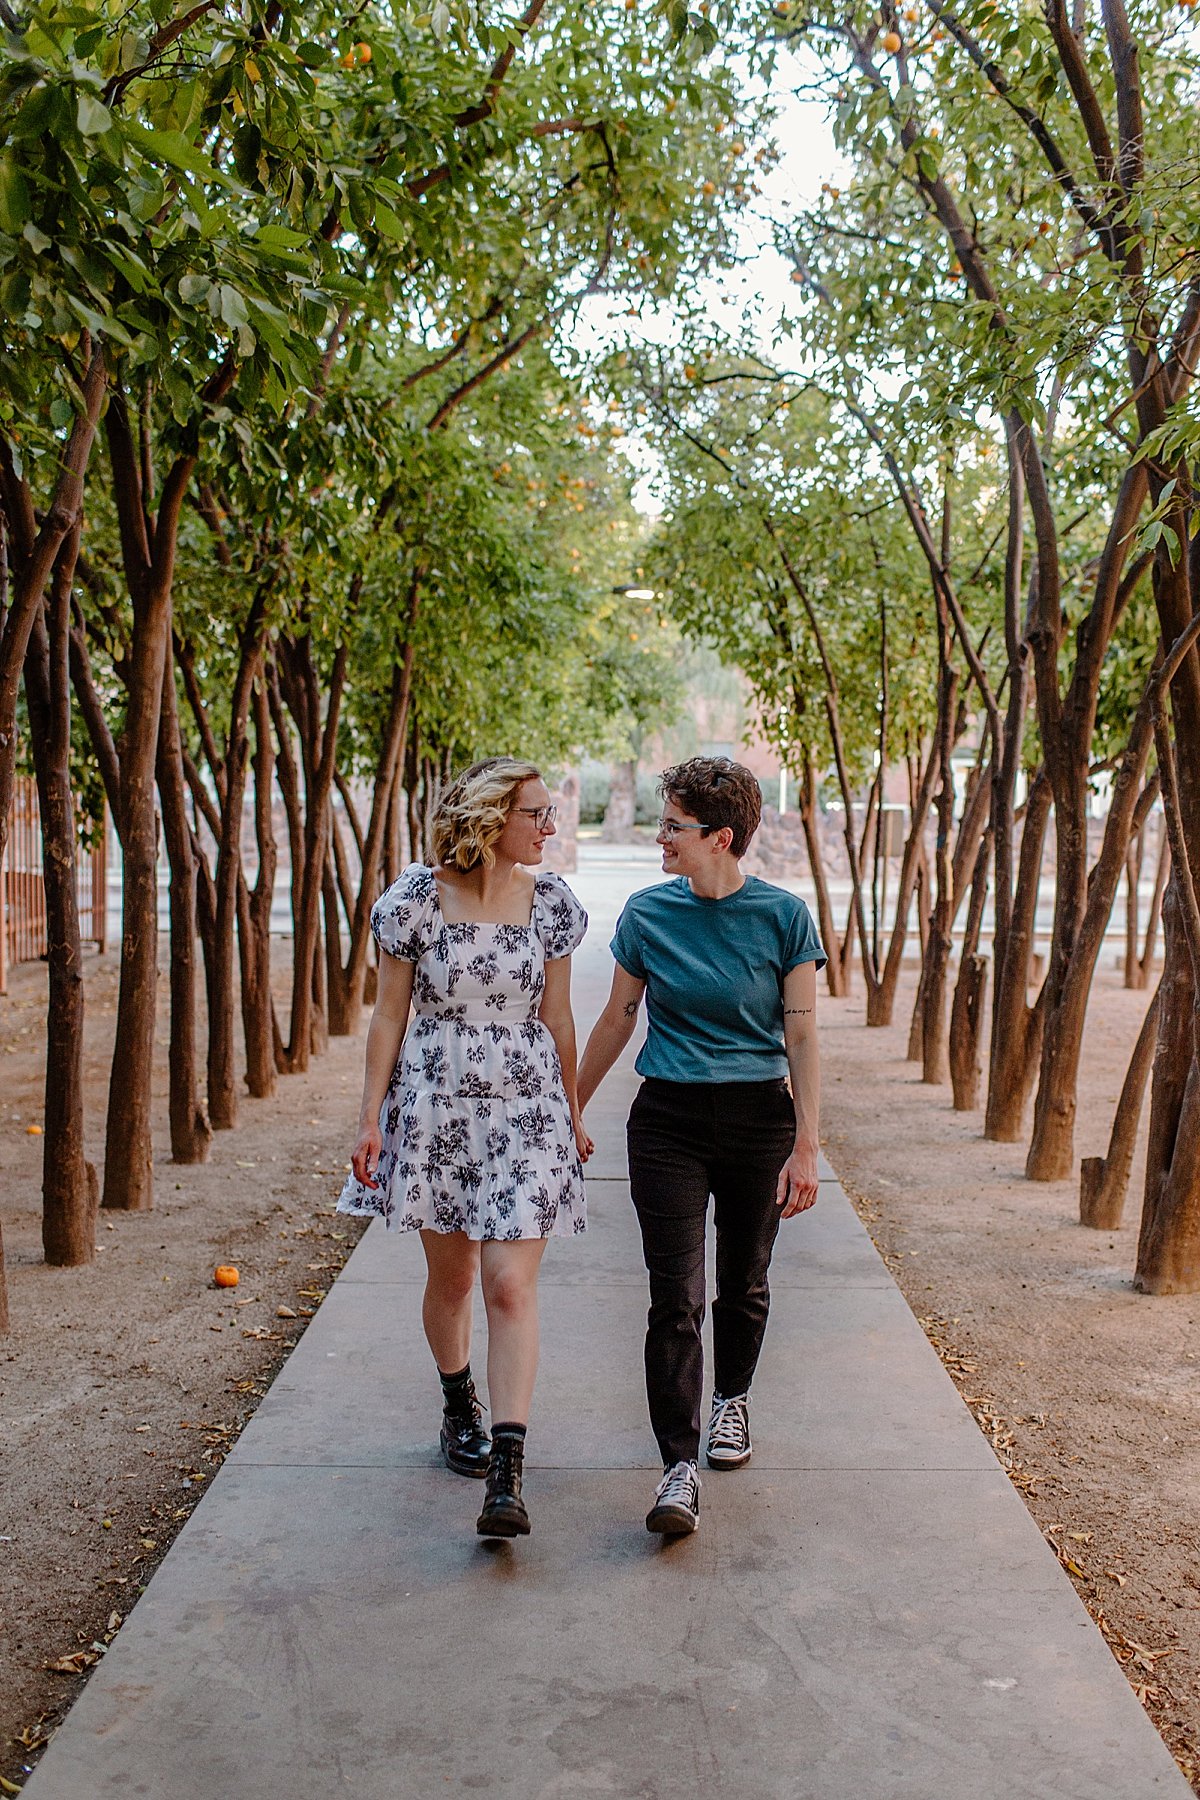  Holding hands and walking campus path in Arizona by Lucy Bouman 